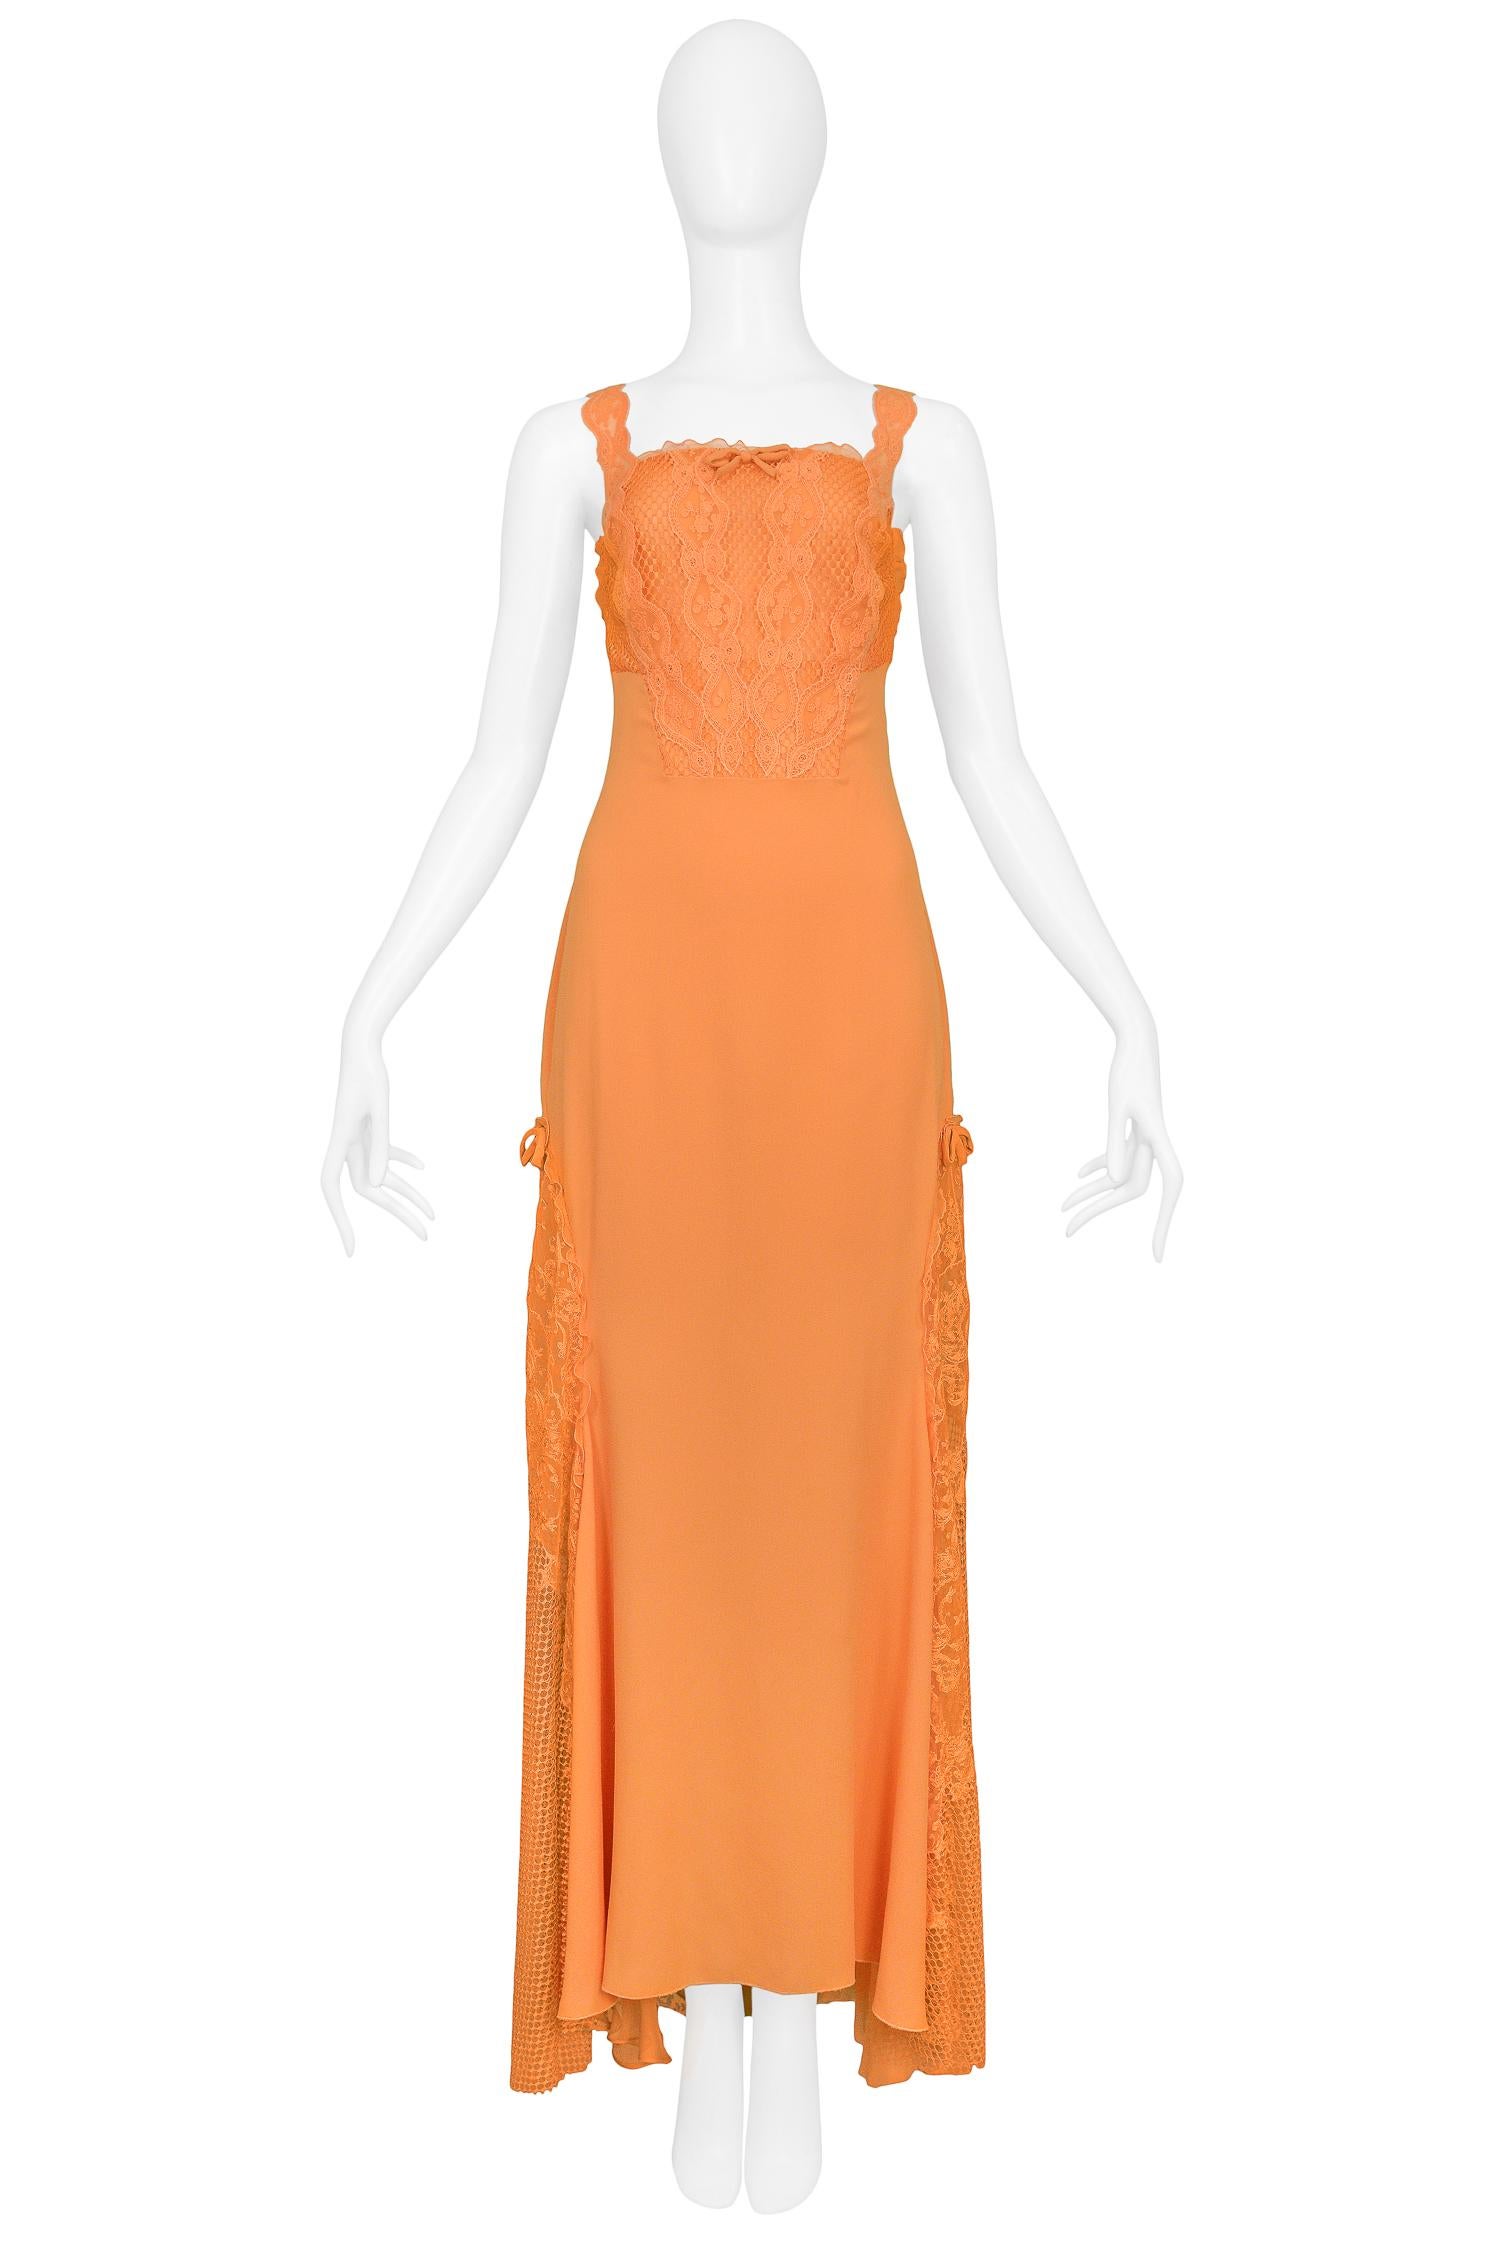 Vintage Gianni Versace Apricot Lace Runway Gown 1997 at 1stDibs ...